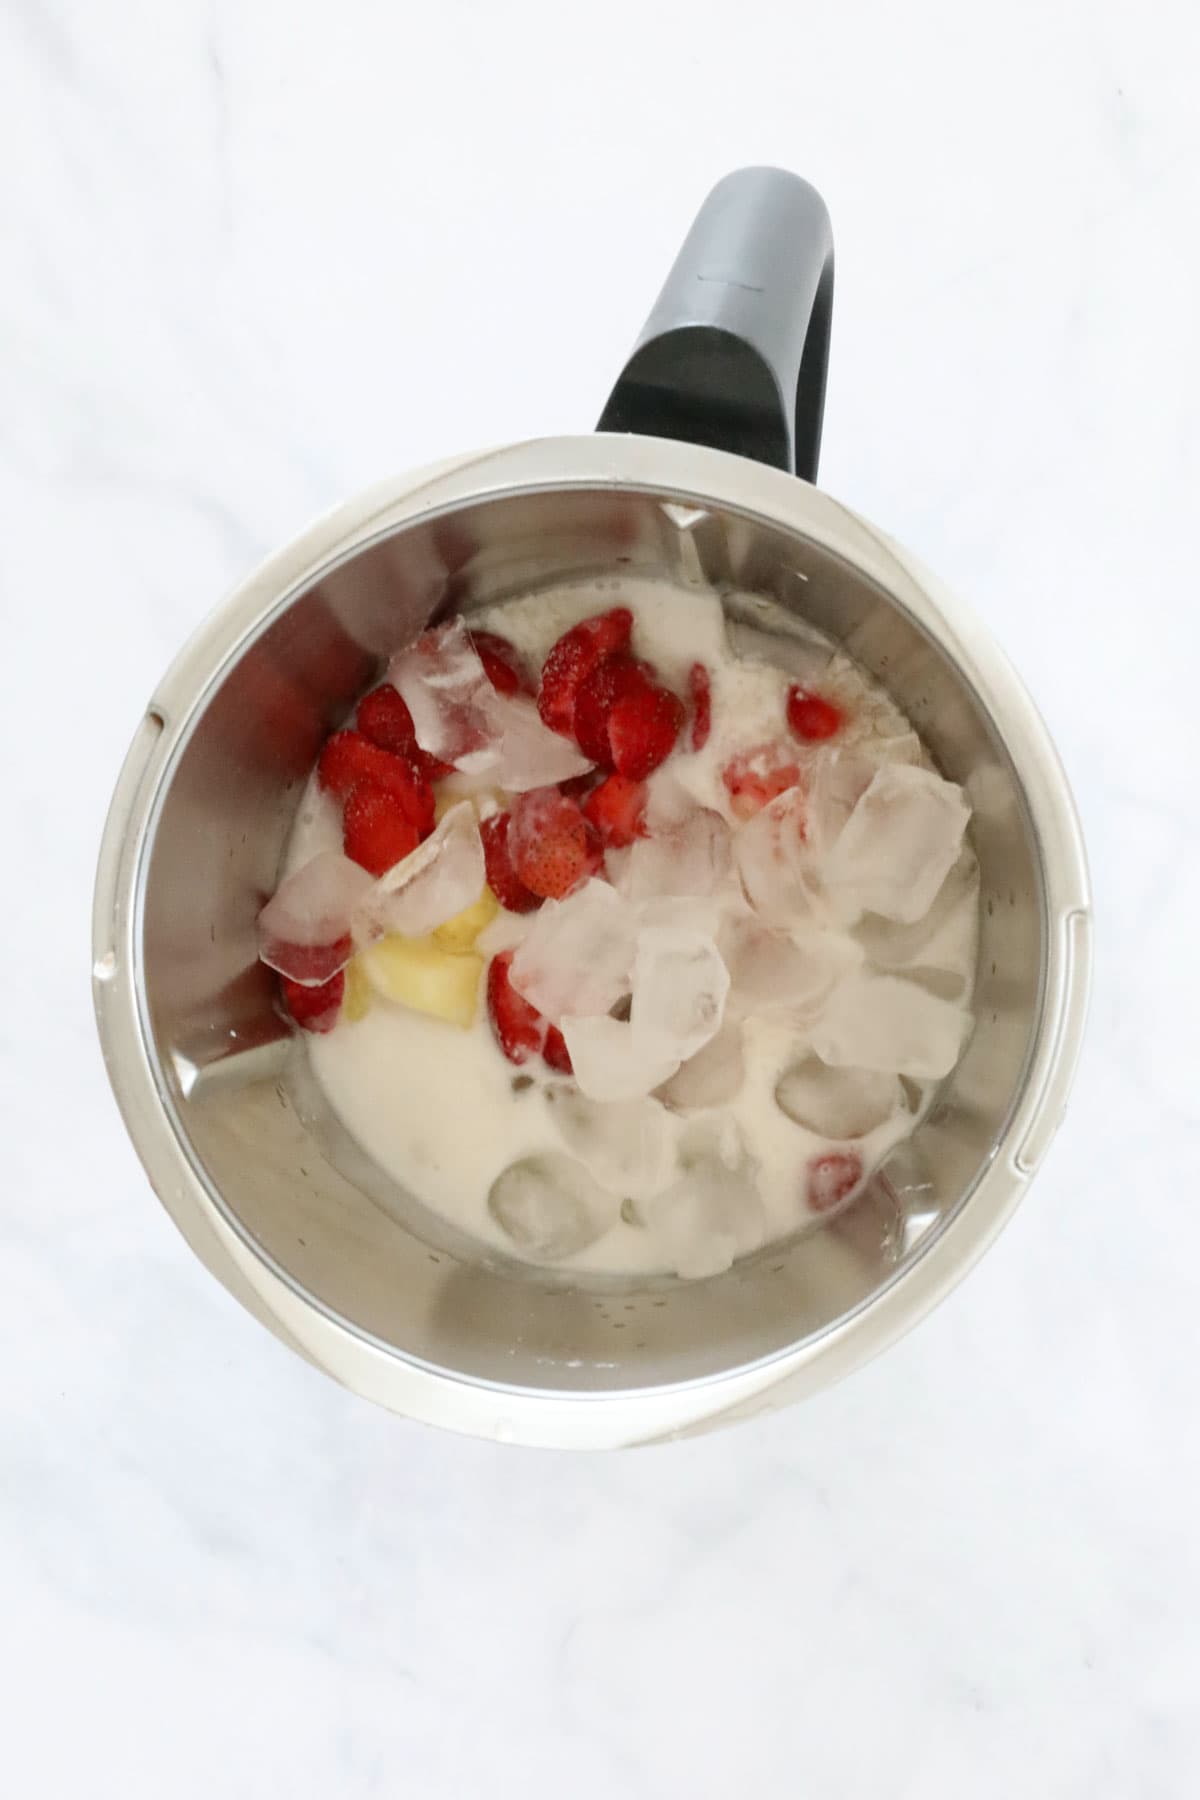 Ice, strawberries, pineapple and coconut cream in a blender jug.